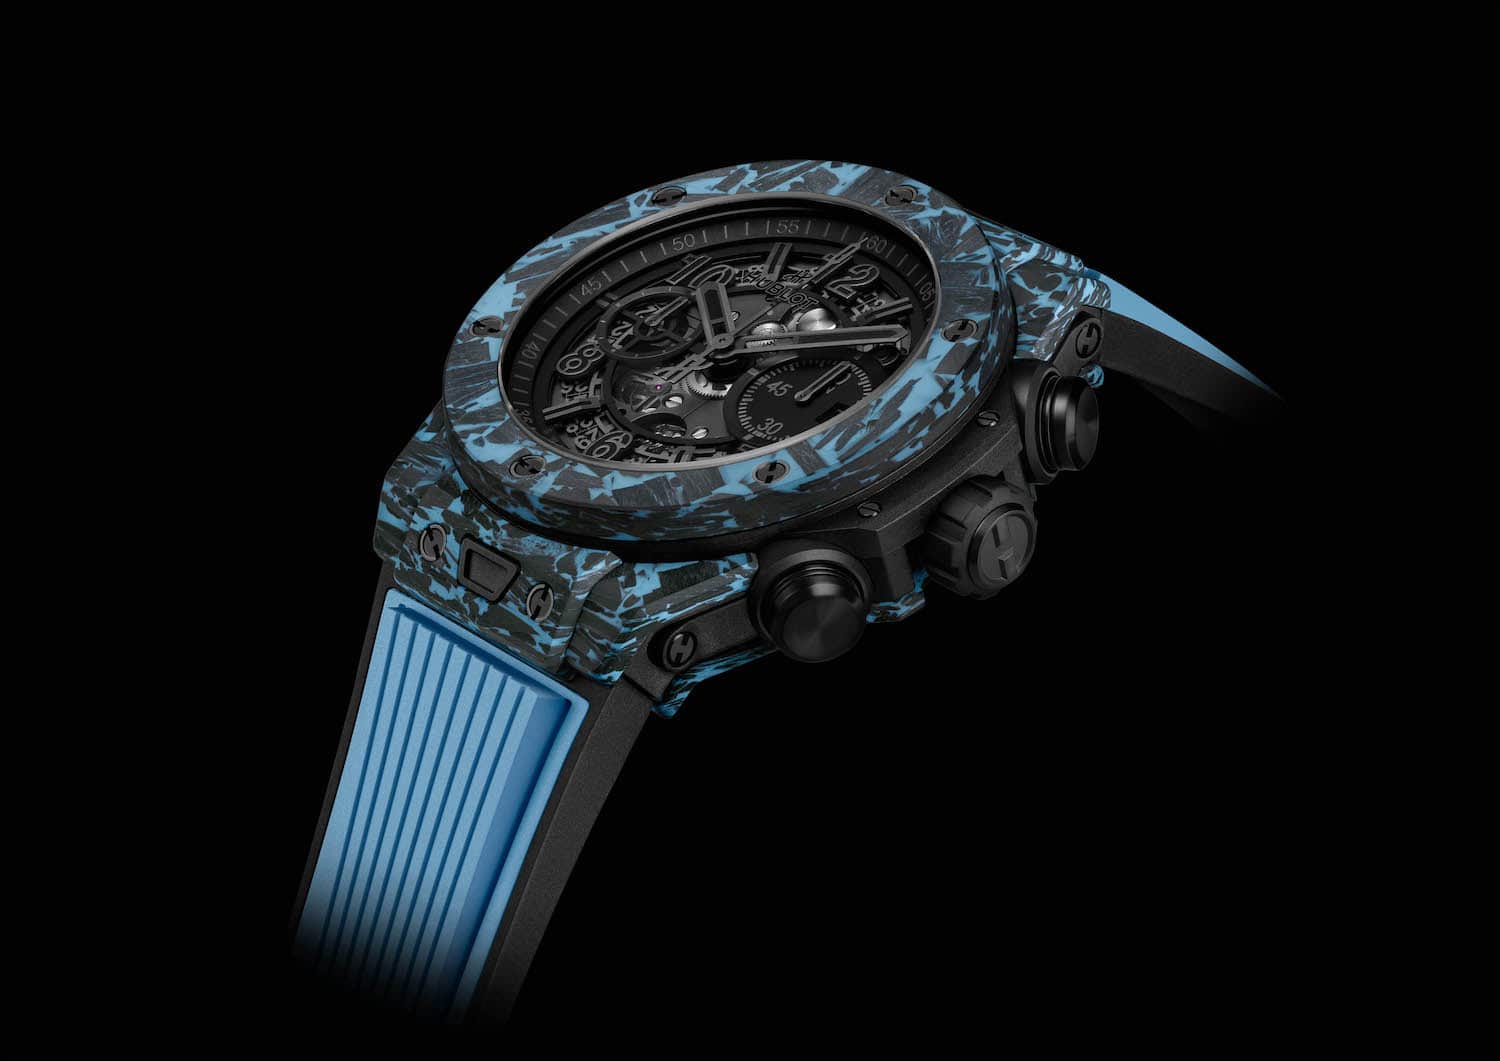 From Hublot, a Japan limited edition Big Bang is here! |Big Bang Unico Carbon Sky Blue | octane.jp